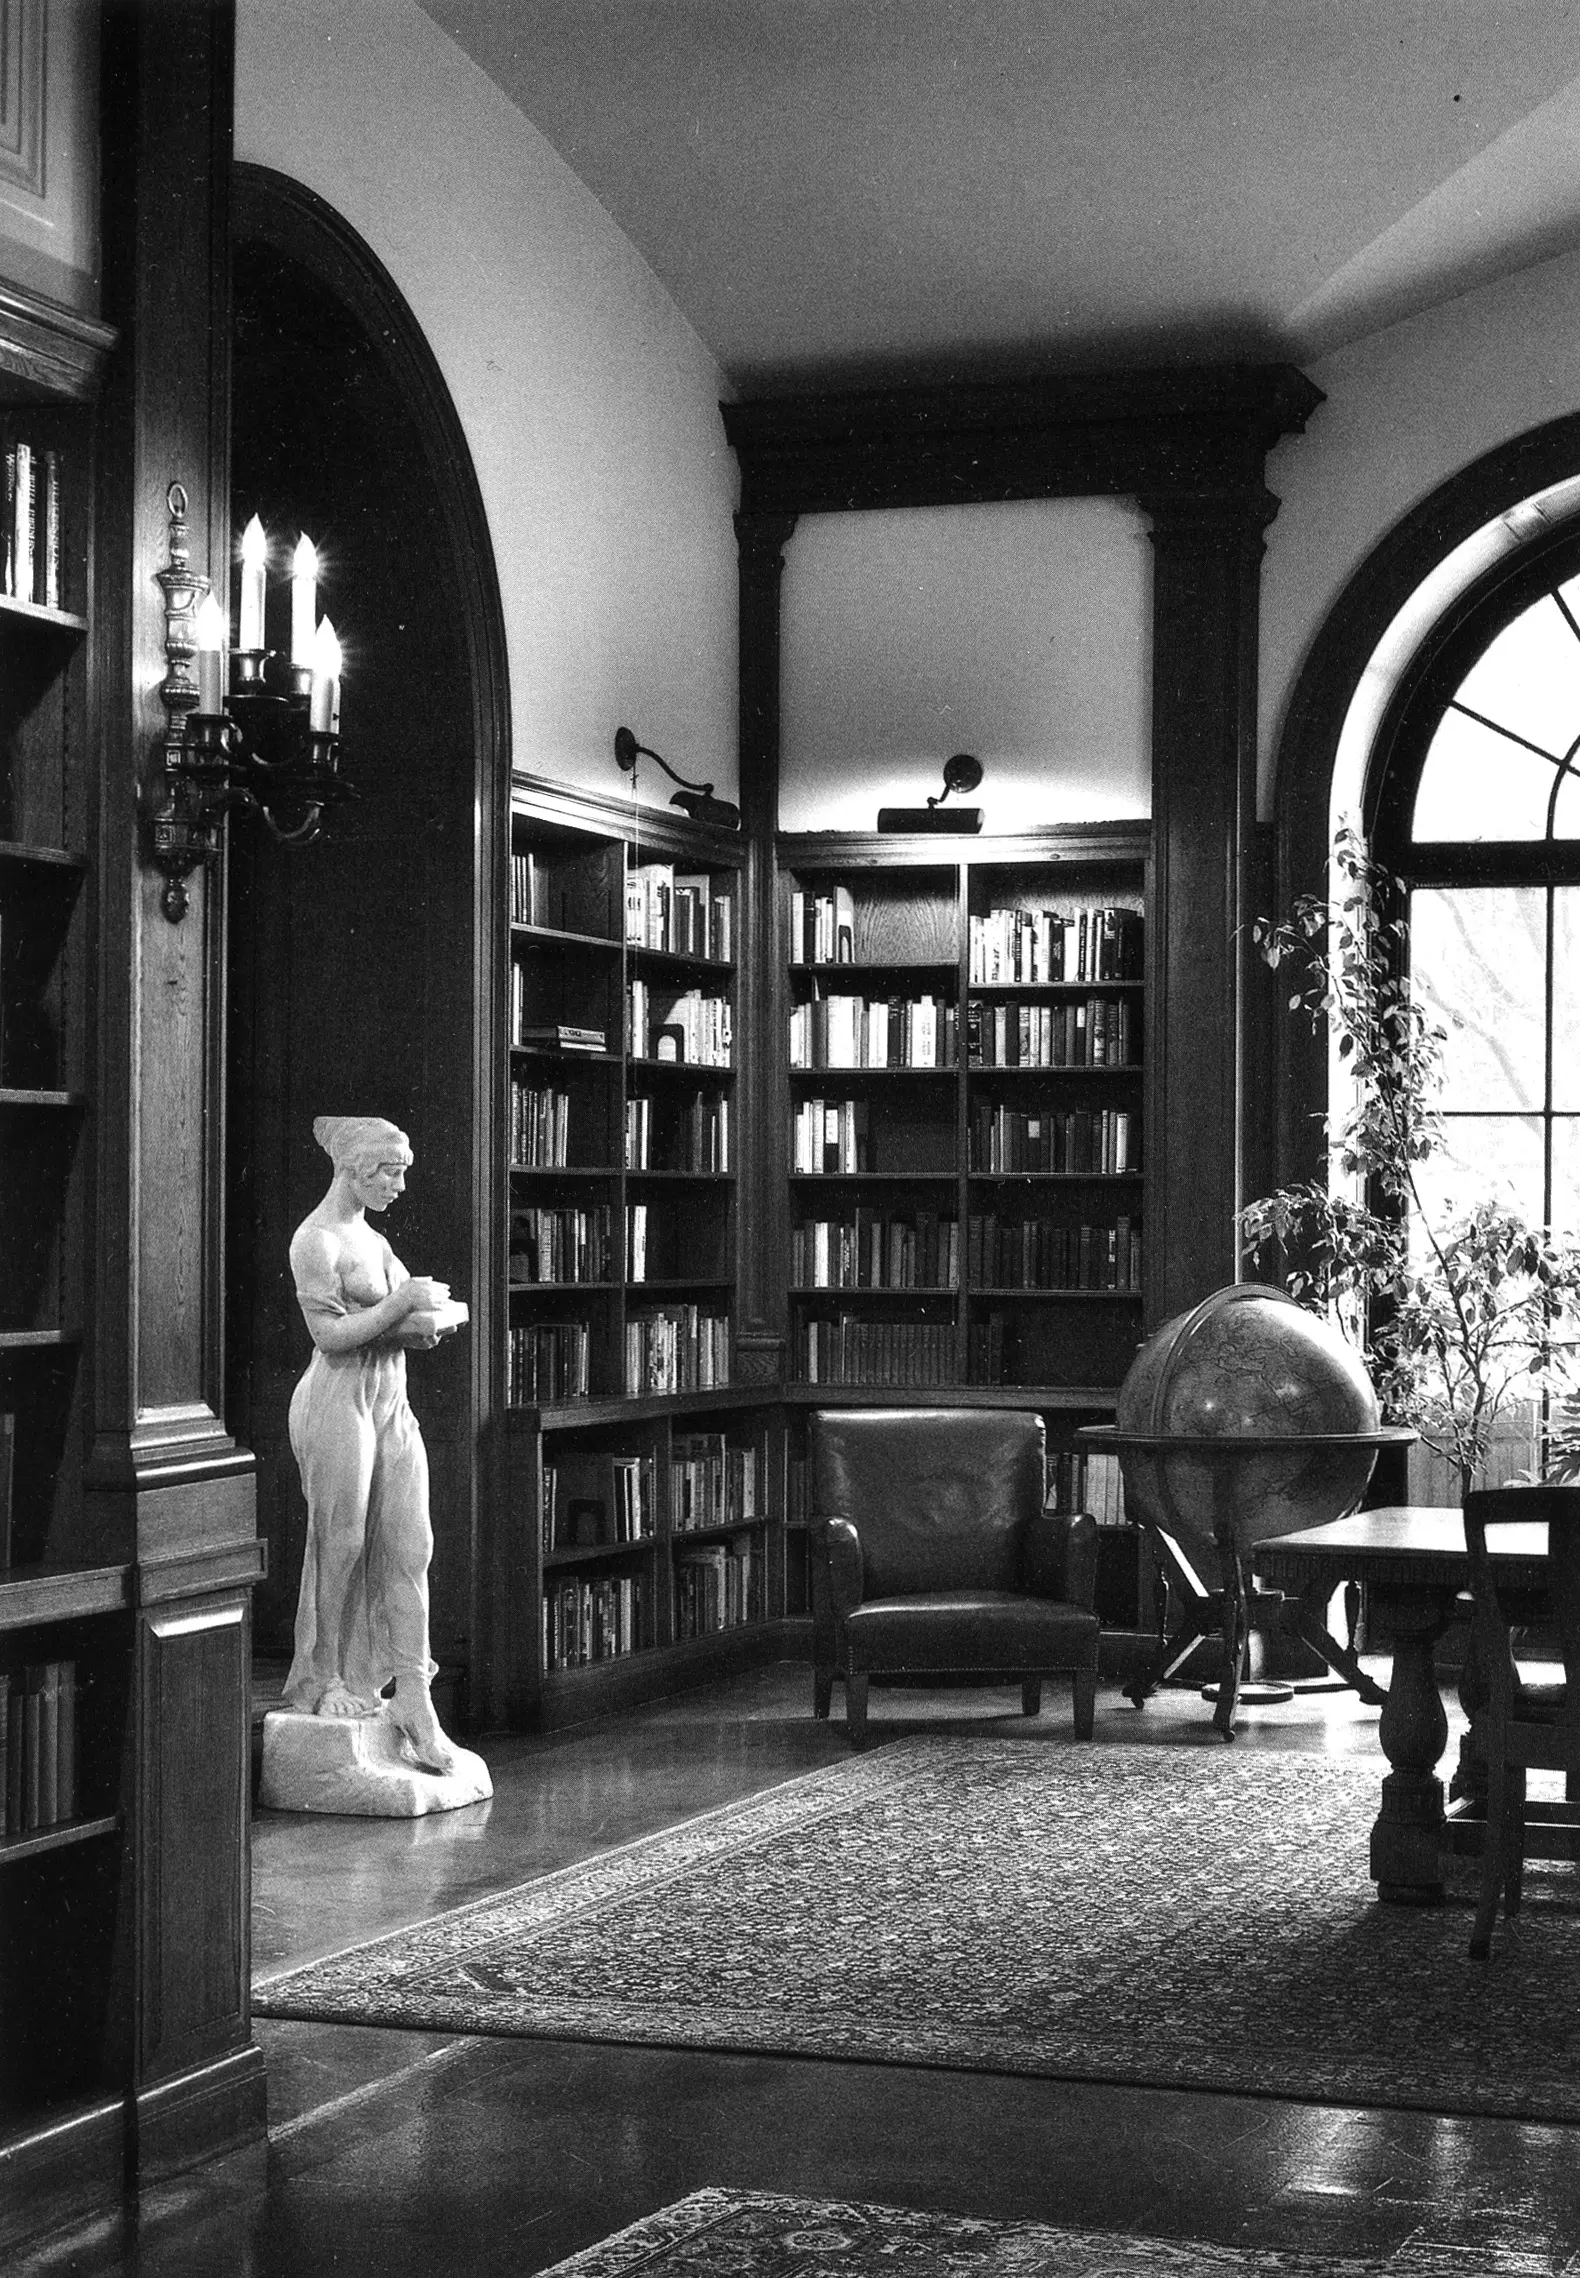 A black and white photograph of a room. To the left, a marble statue of a woman stands beside a bookcase. To the right, a chair and large globe are pictured beside a window.